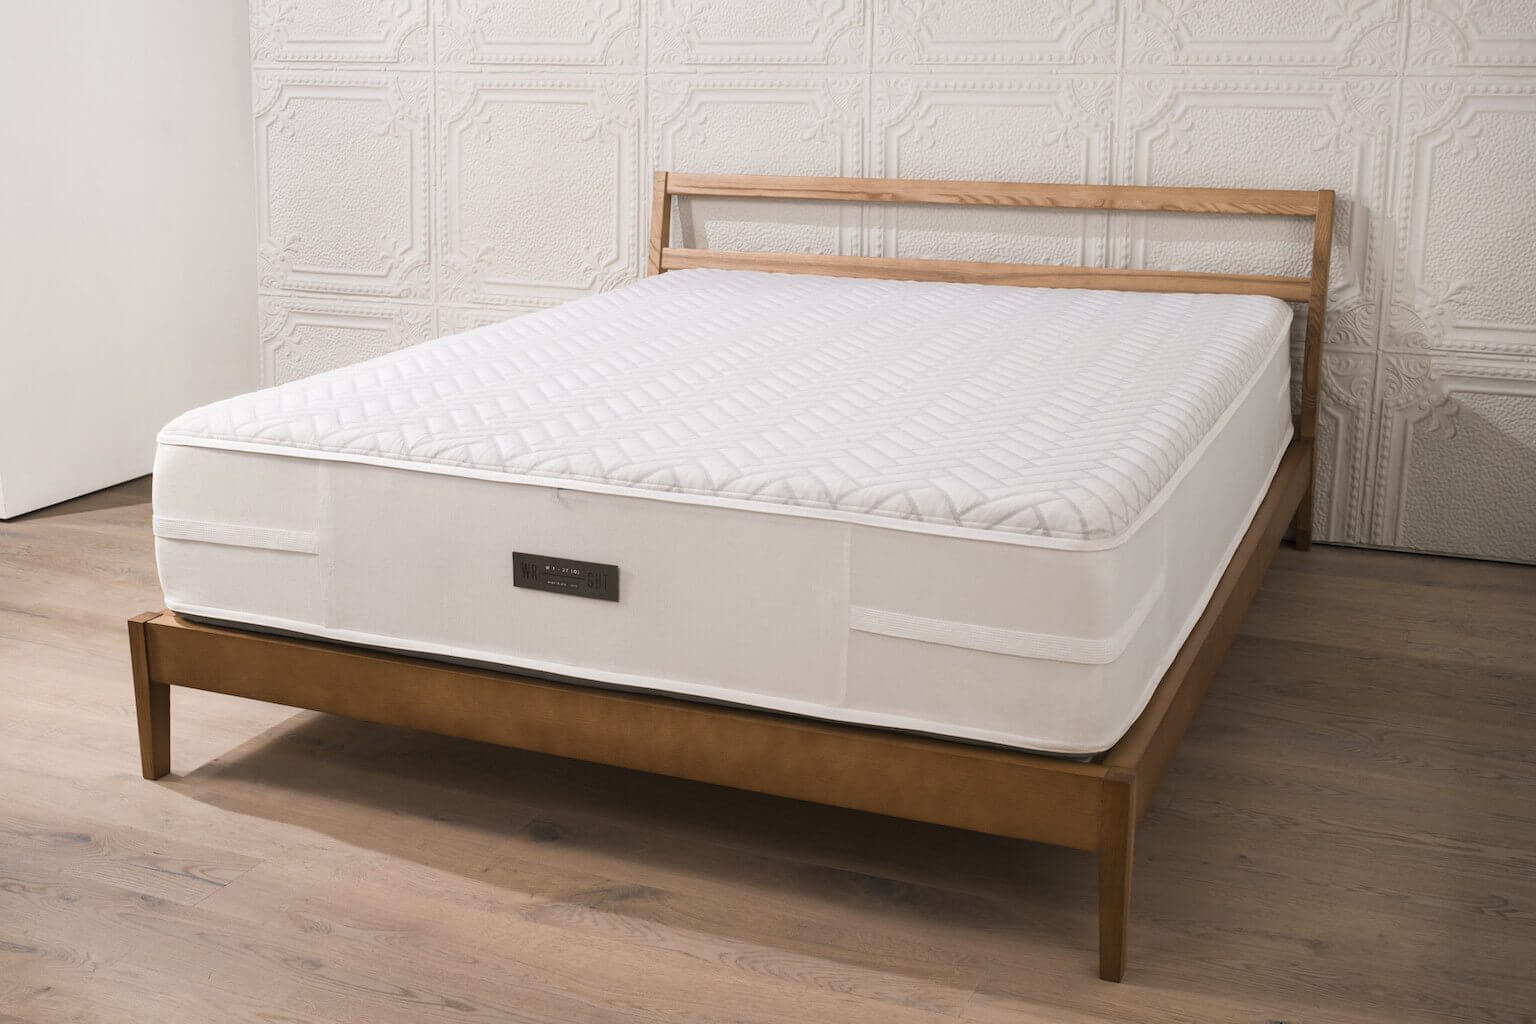 Wright Mattress Review: It's the Right Stuff 1